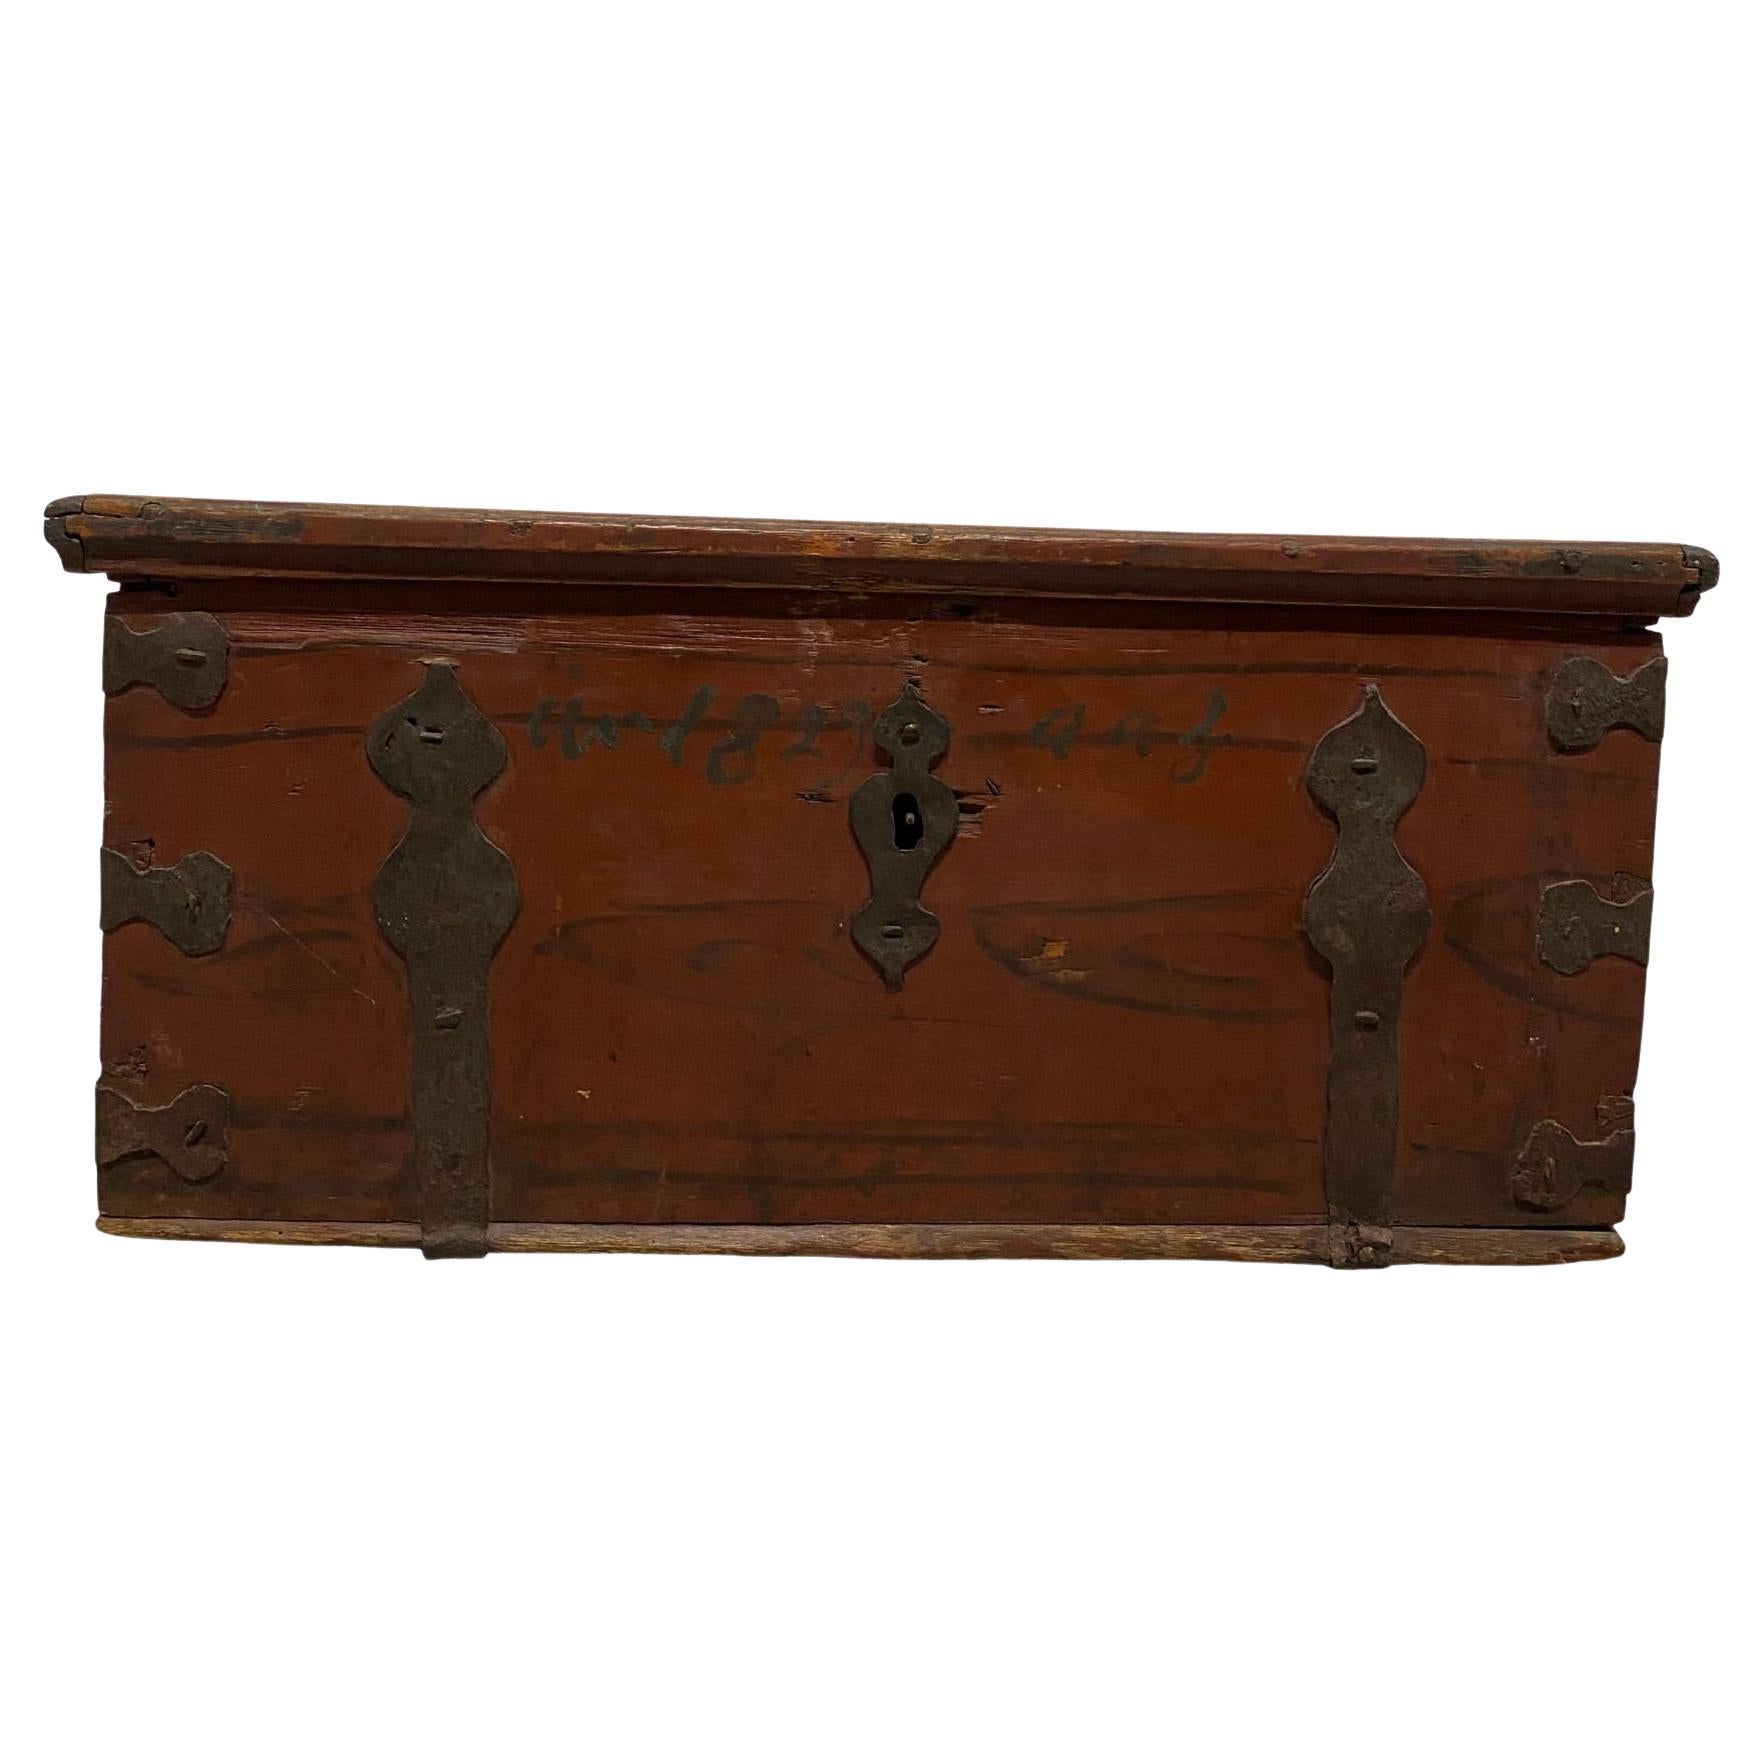 Small Red Painted 19th Century Trunk with Wrought Iron Straps